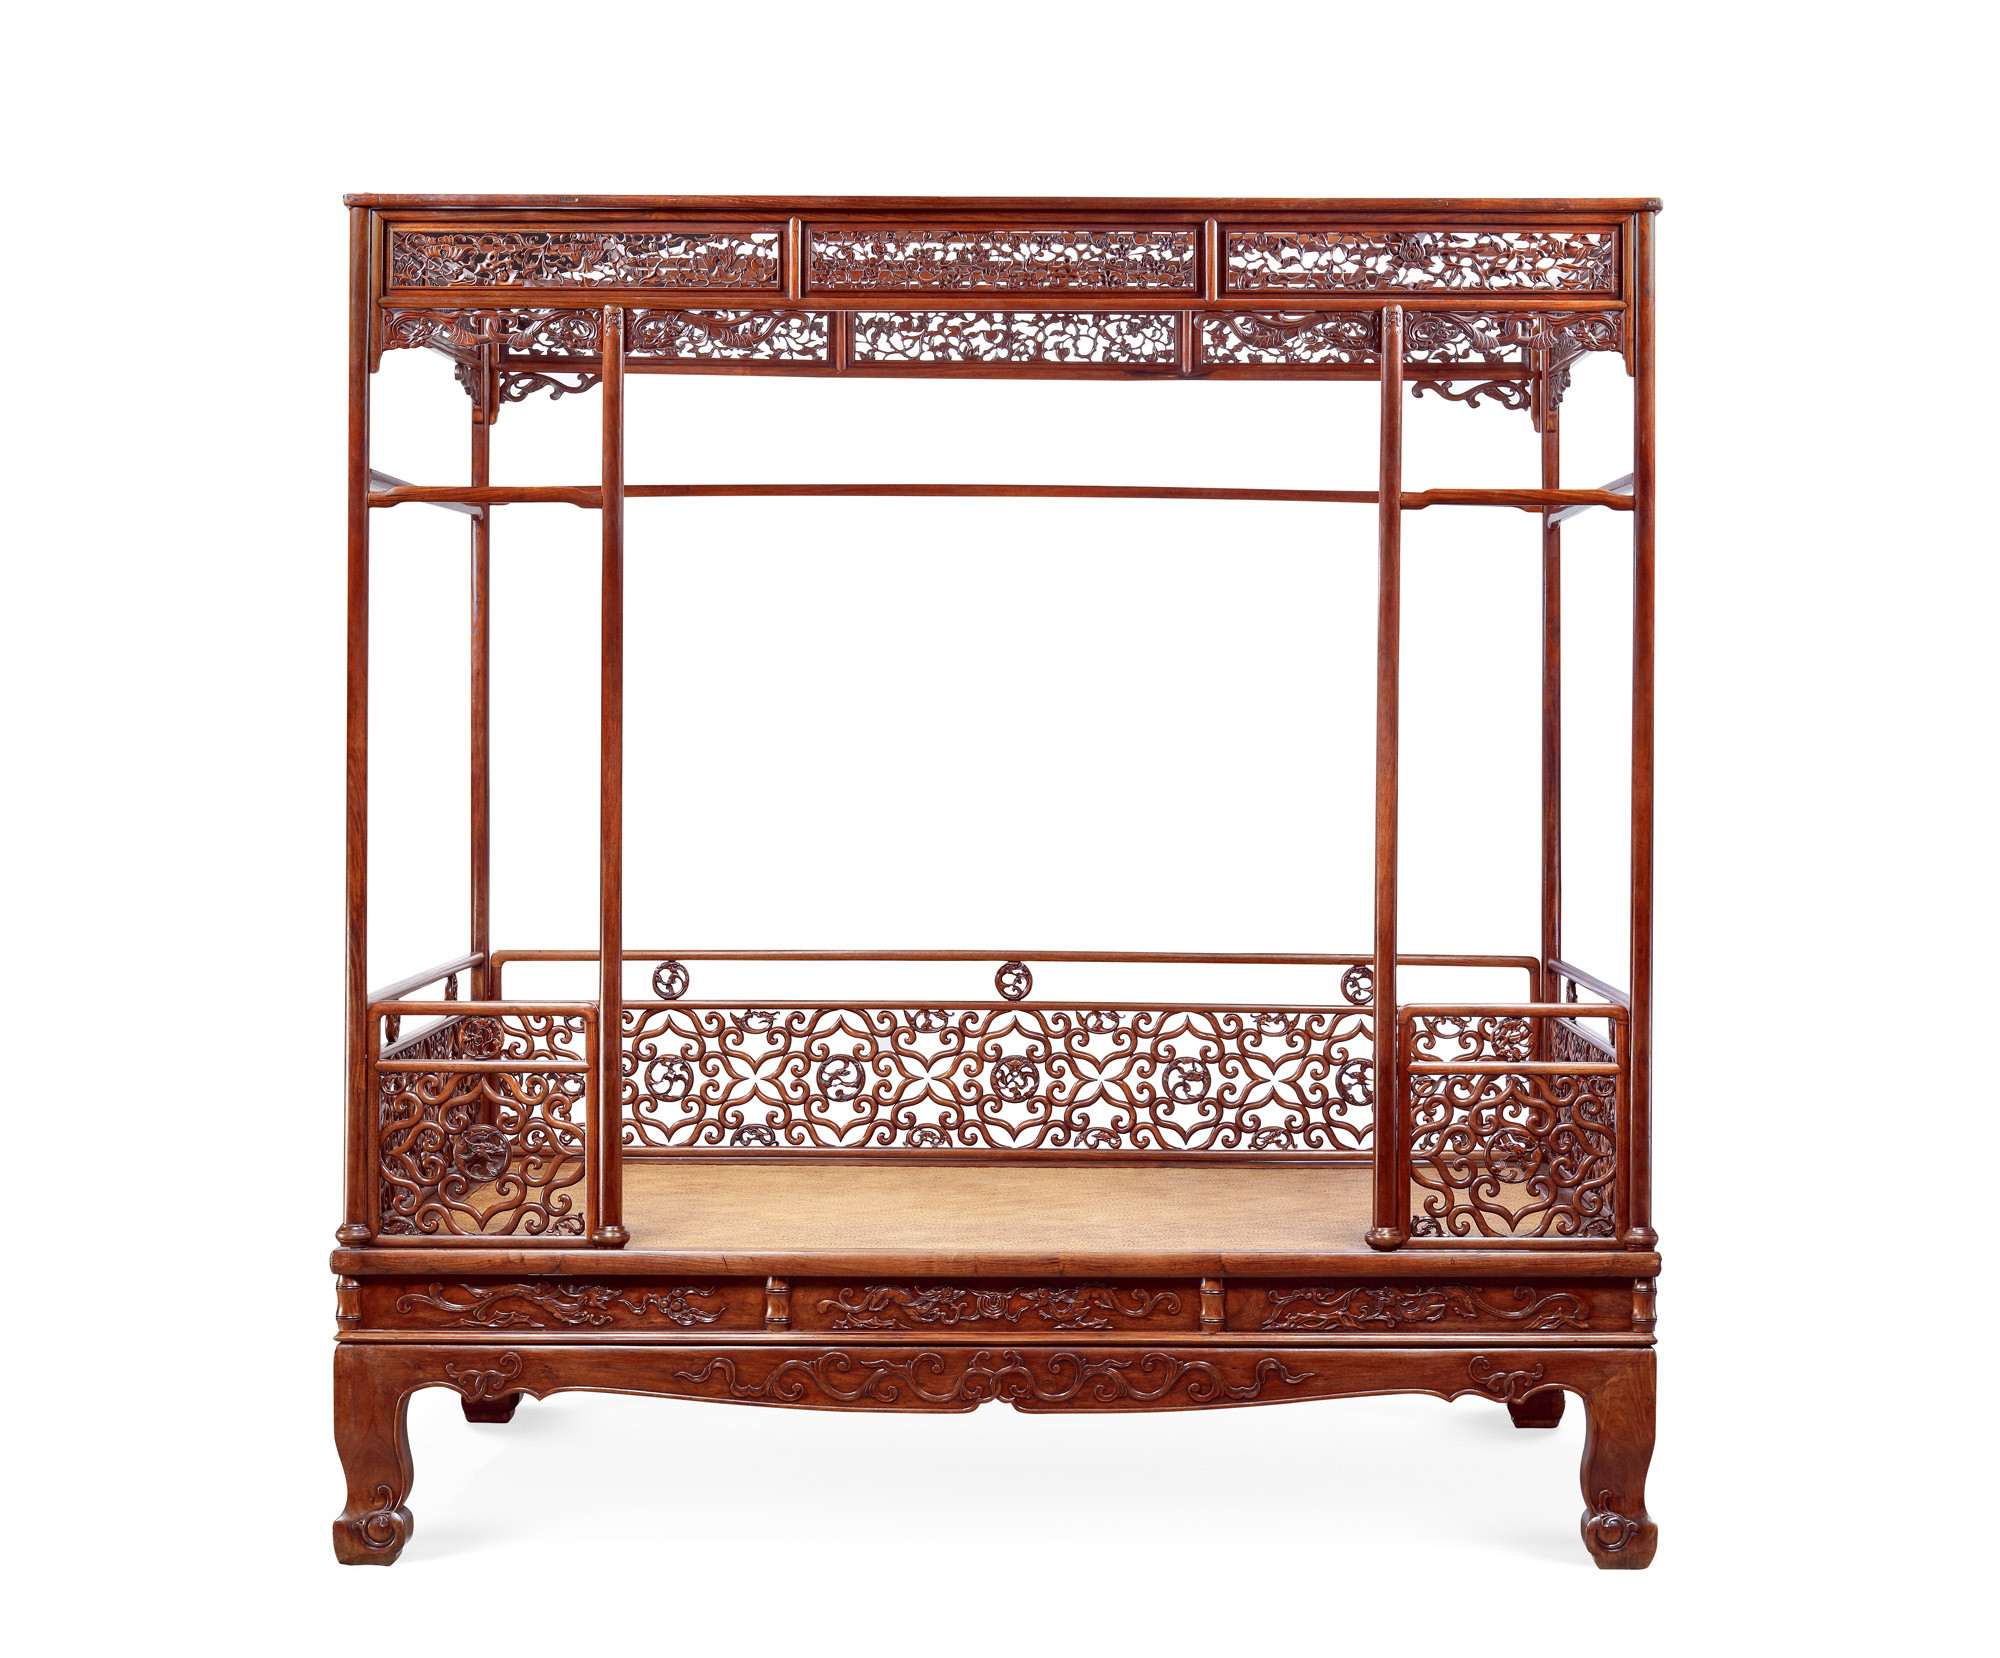 A VERY RARE AND LARGE HUANGHUALI-WOOD BED